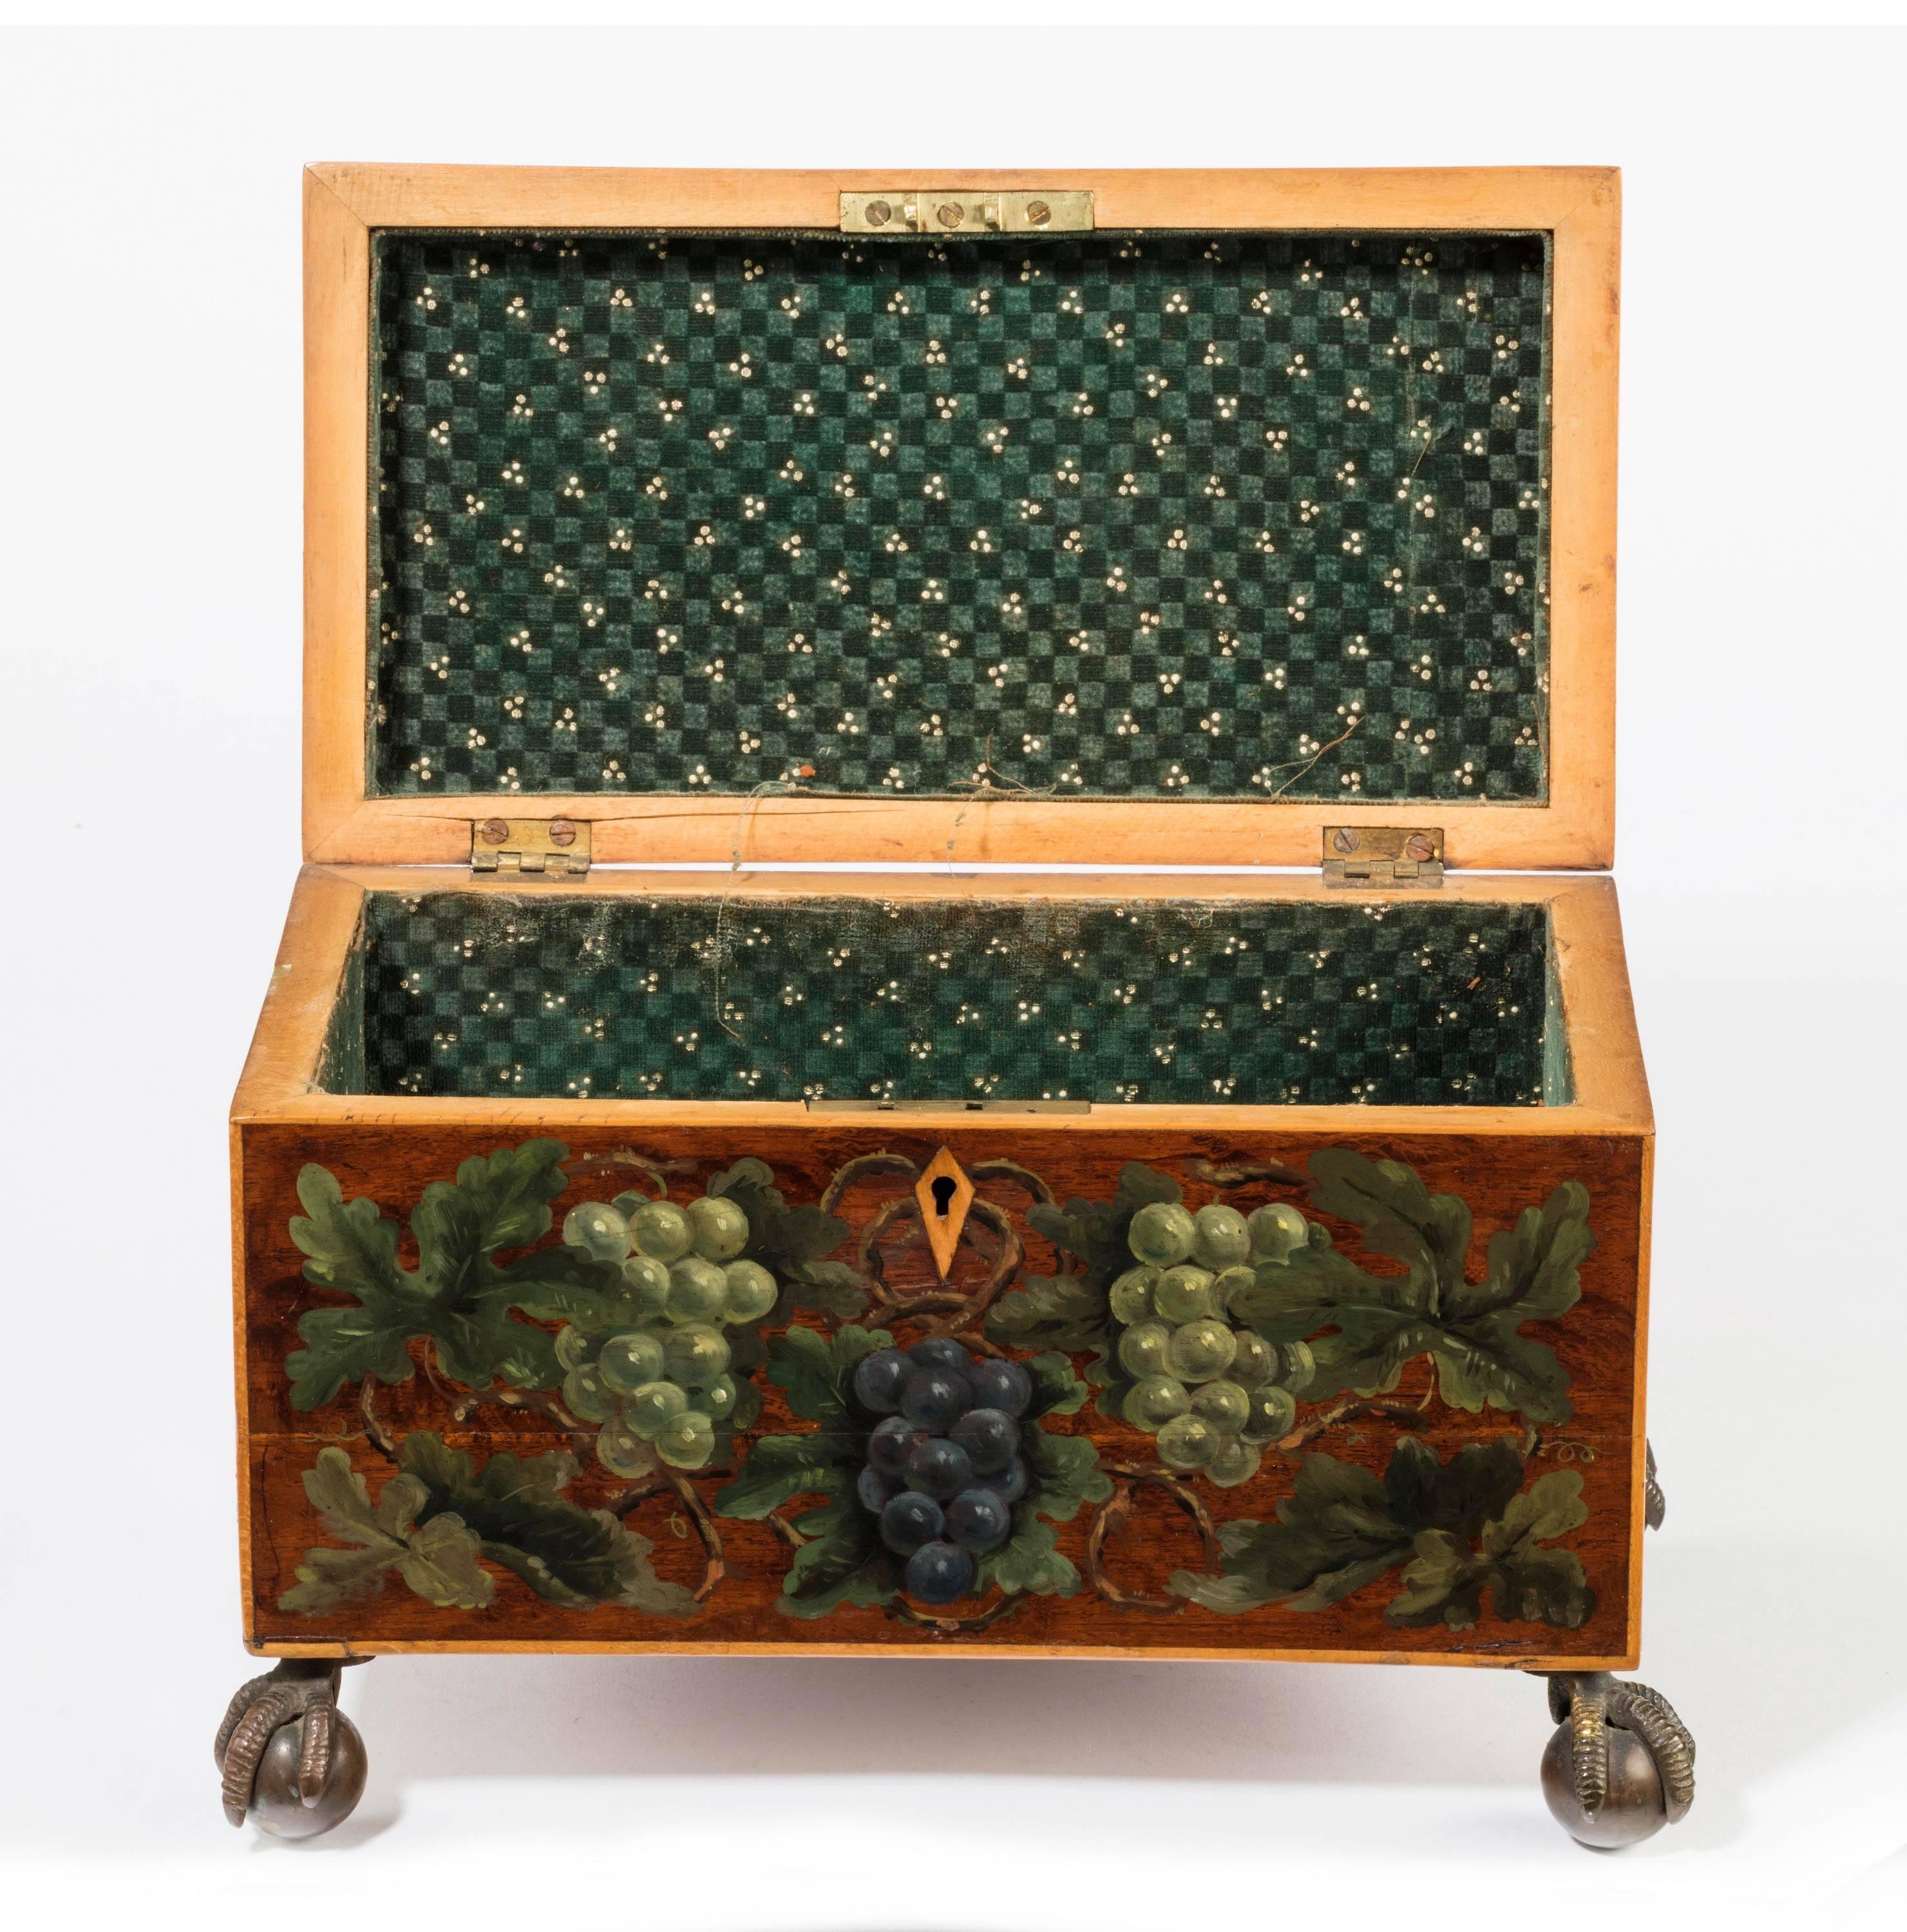 English George III Period Mahogany Box Painted with Grapes and Foliage